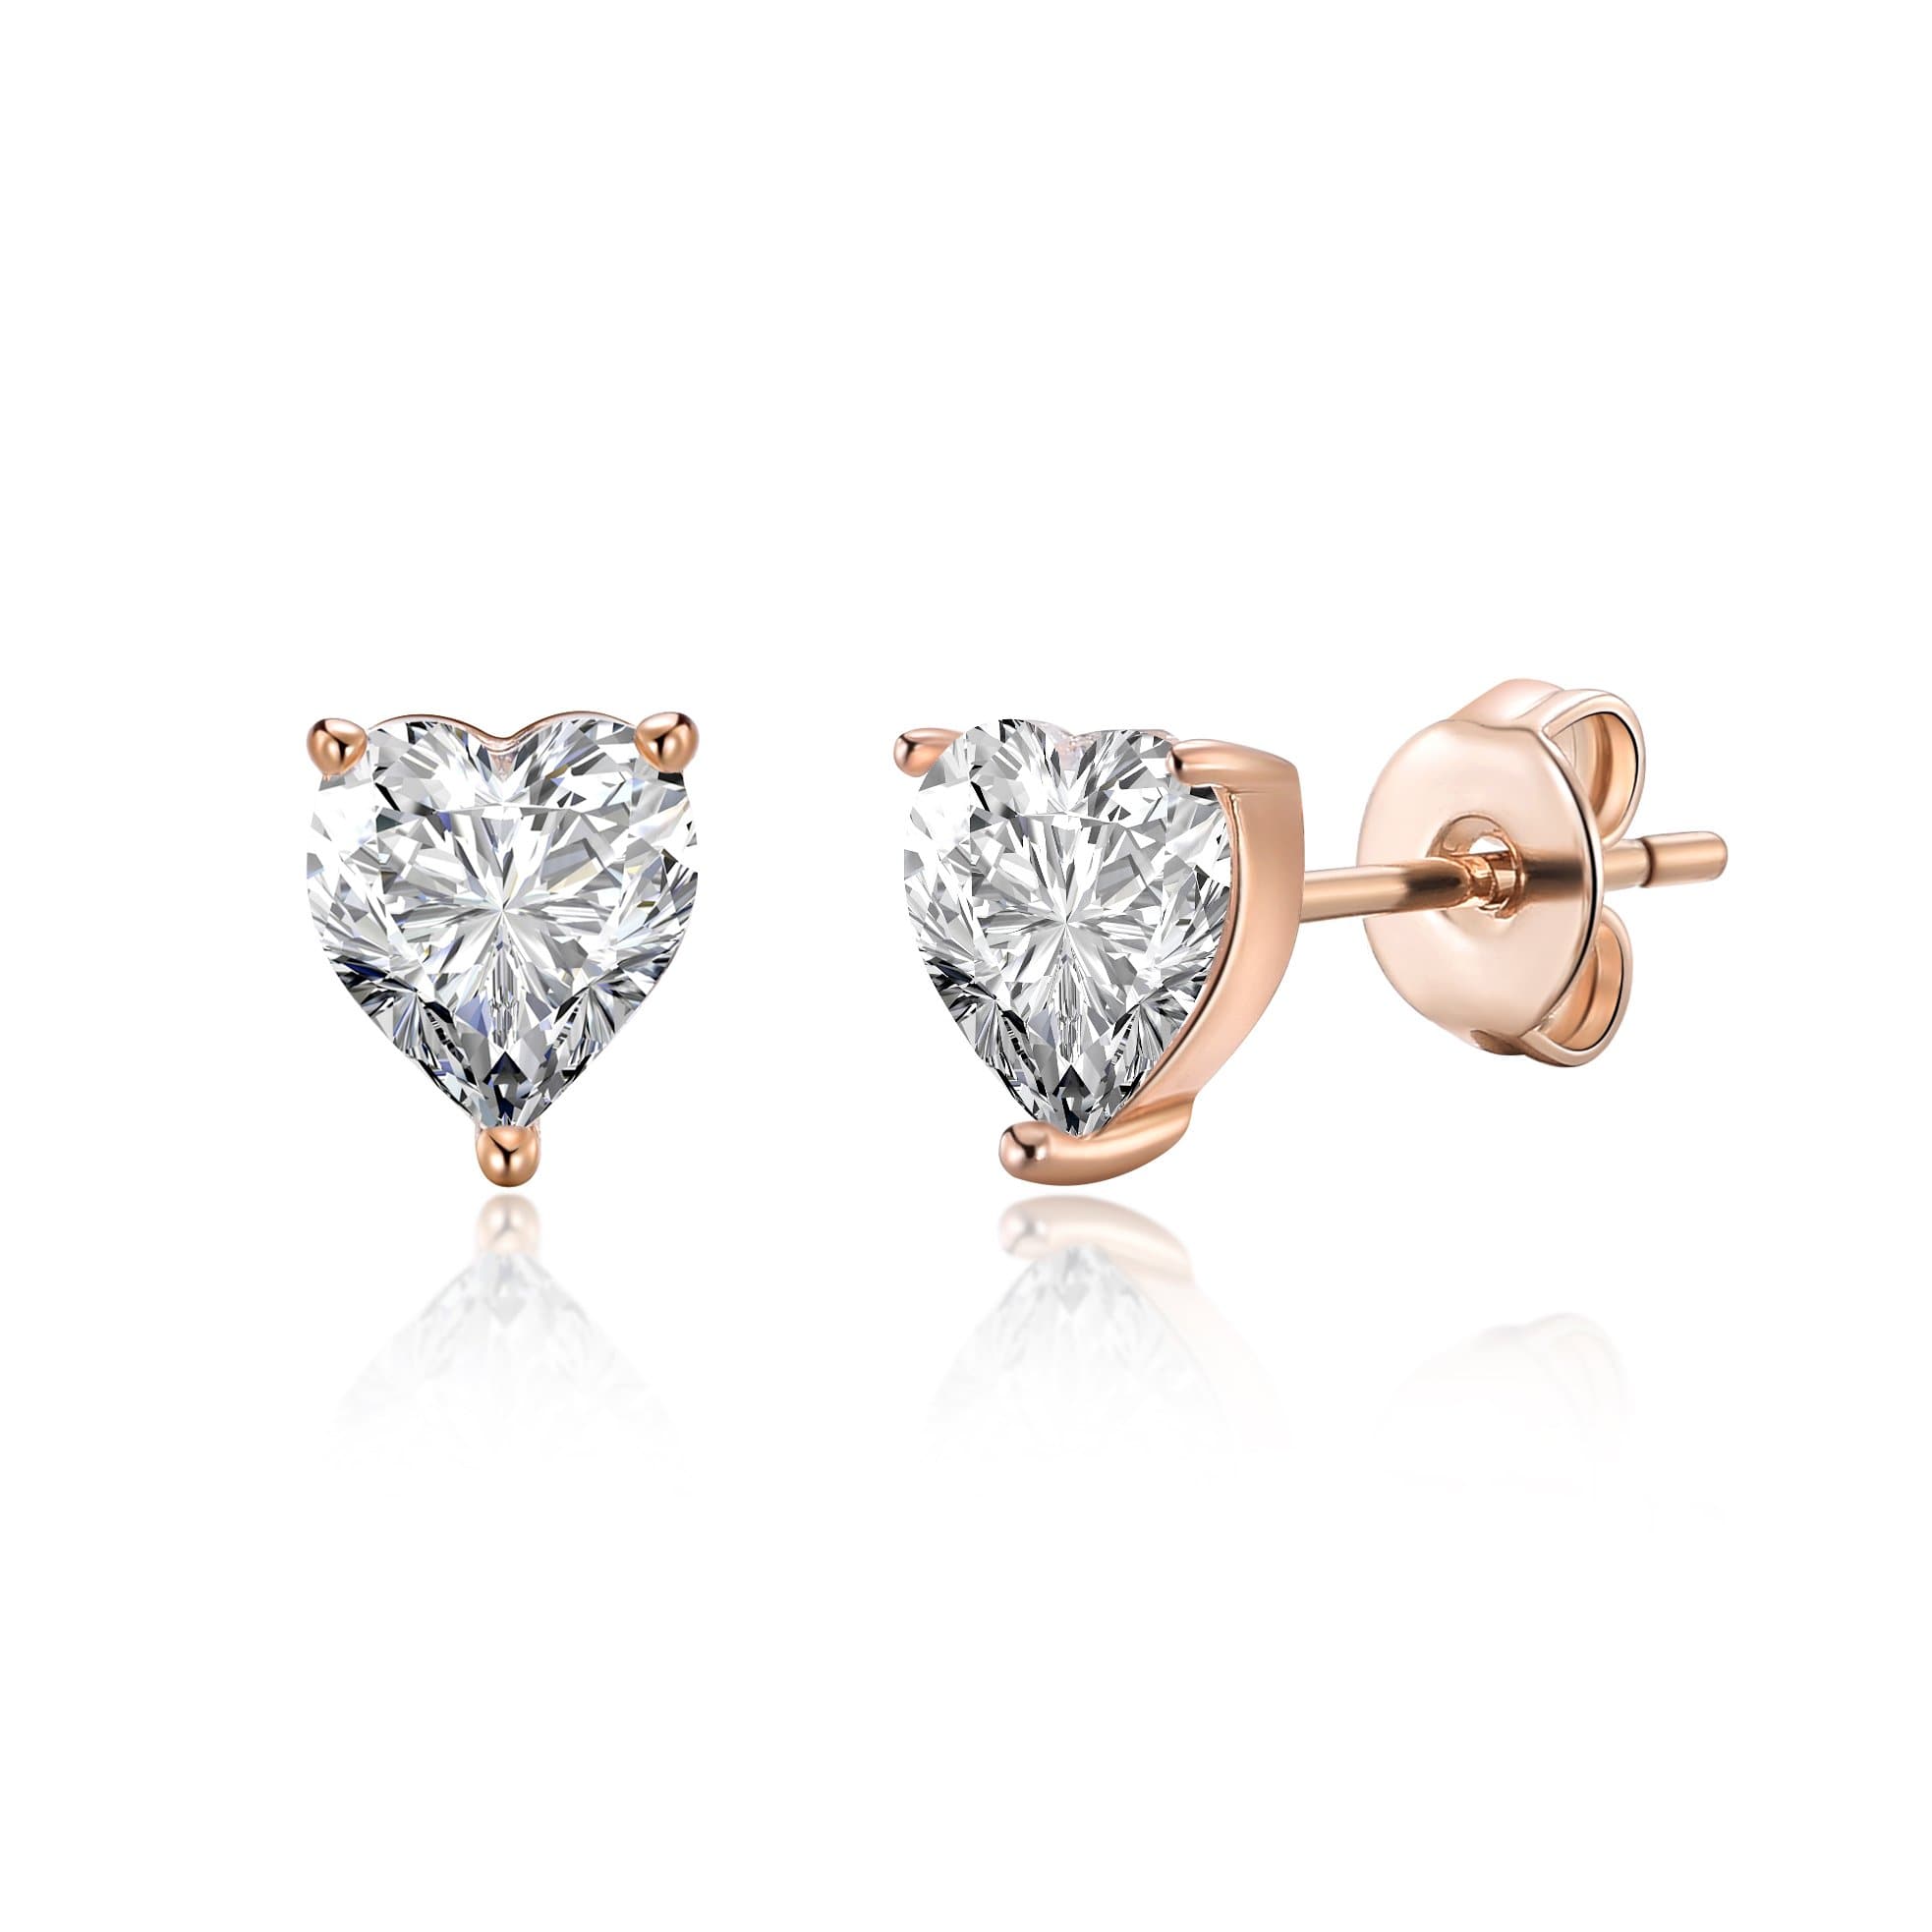 Rose Gold Plated Heart Earrings Created with Zircondia® Crystals by Philip Jones Jewellery